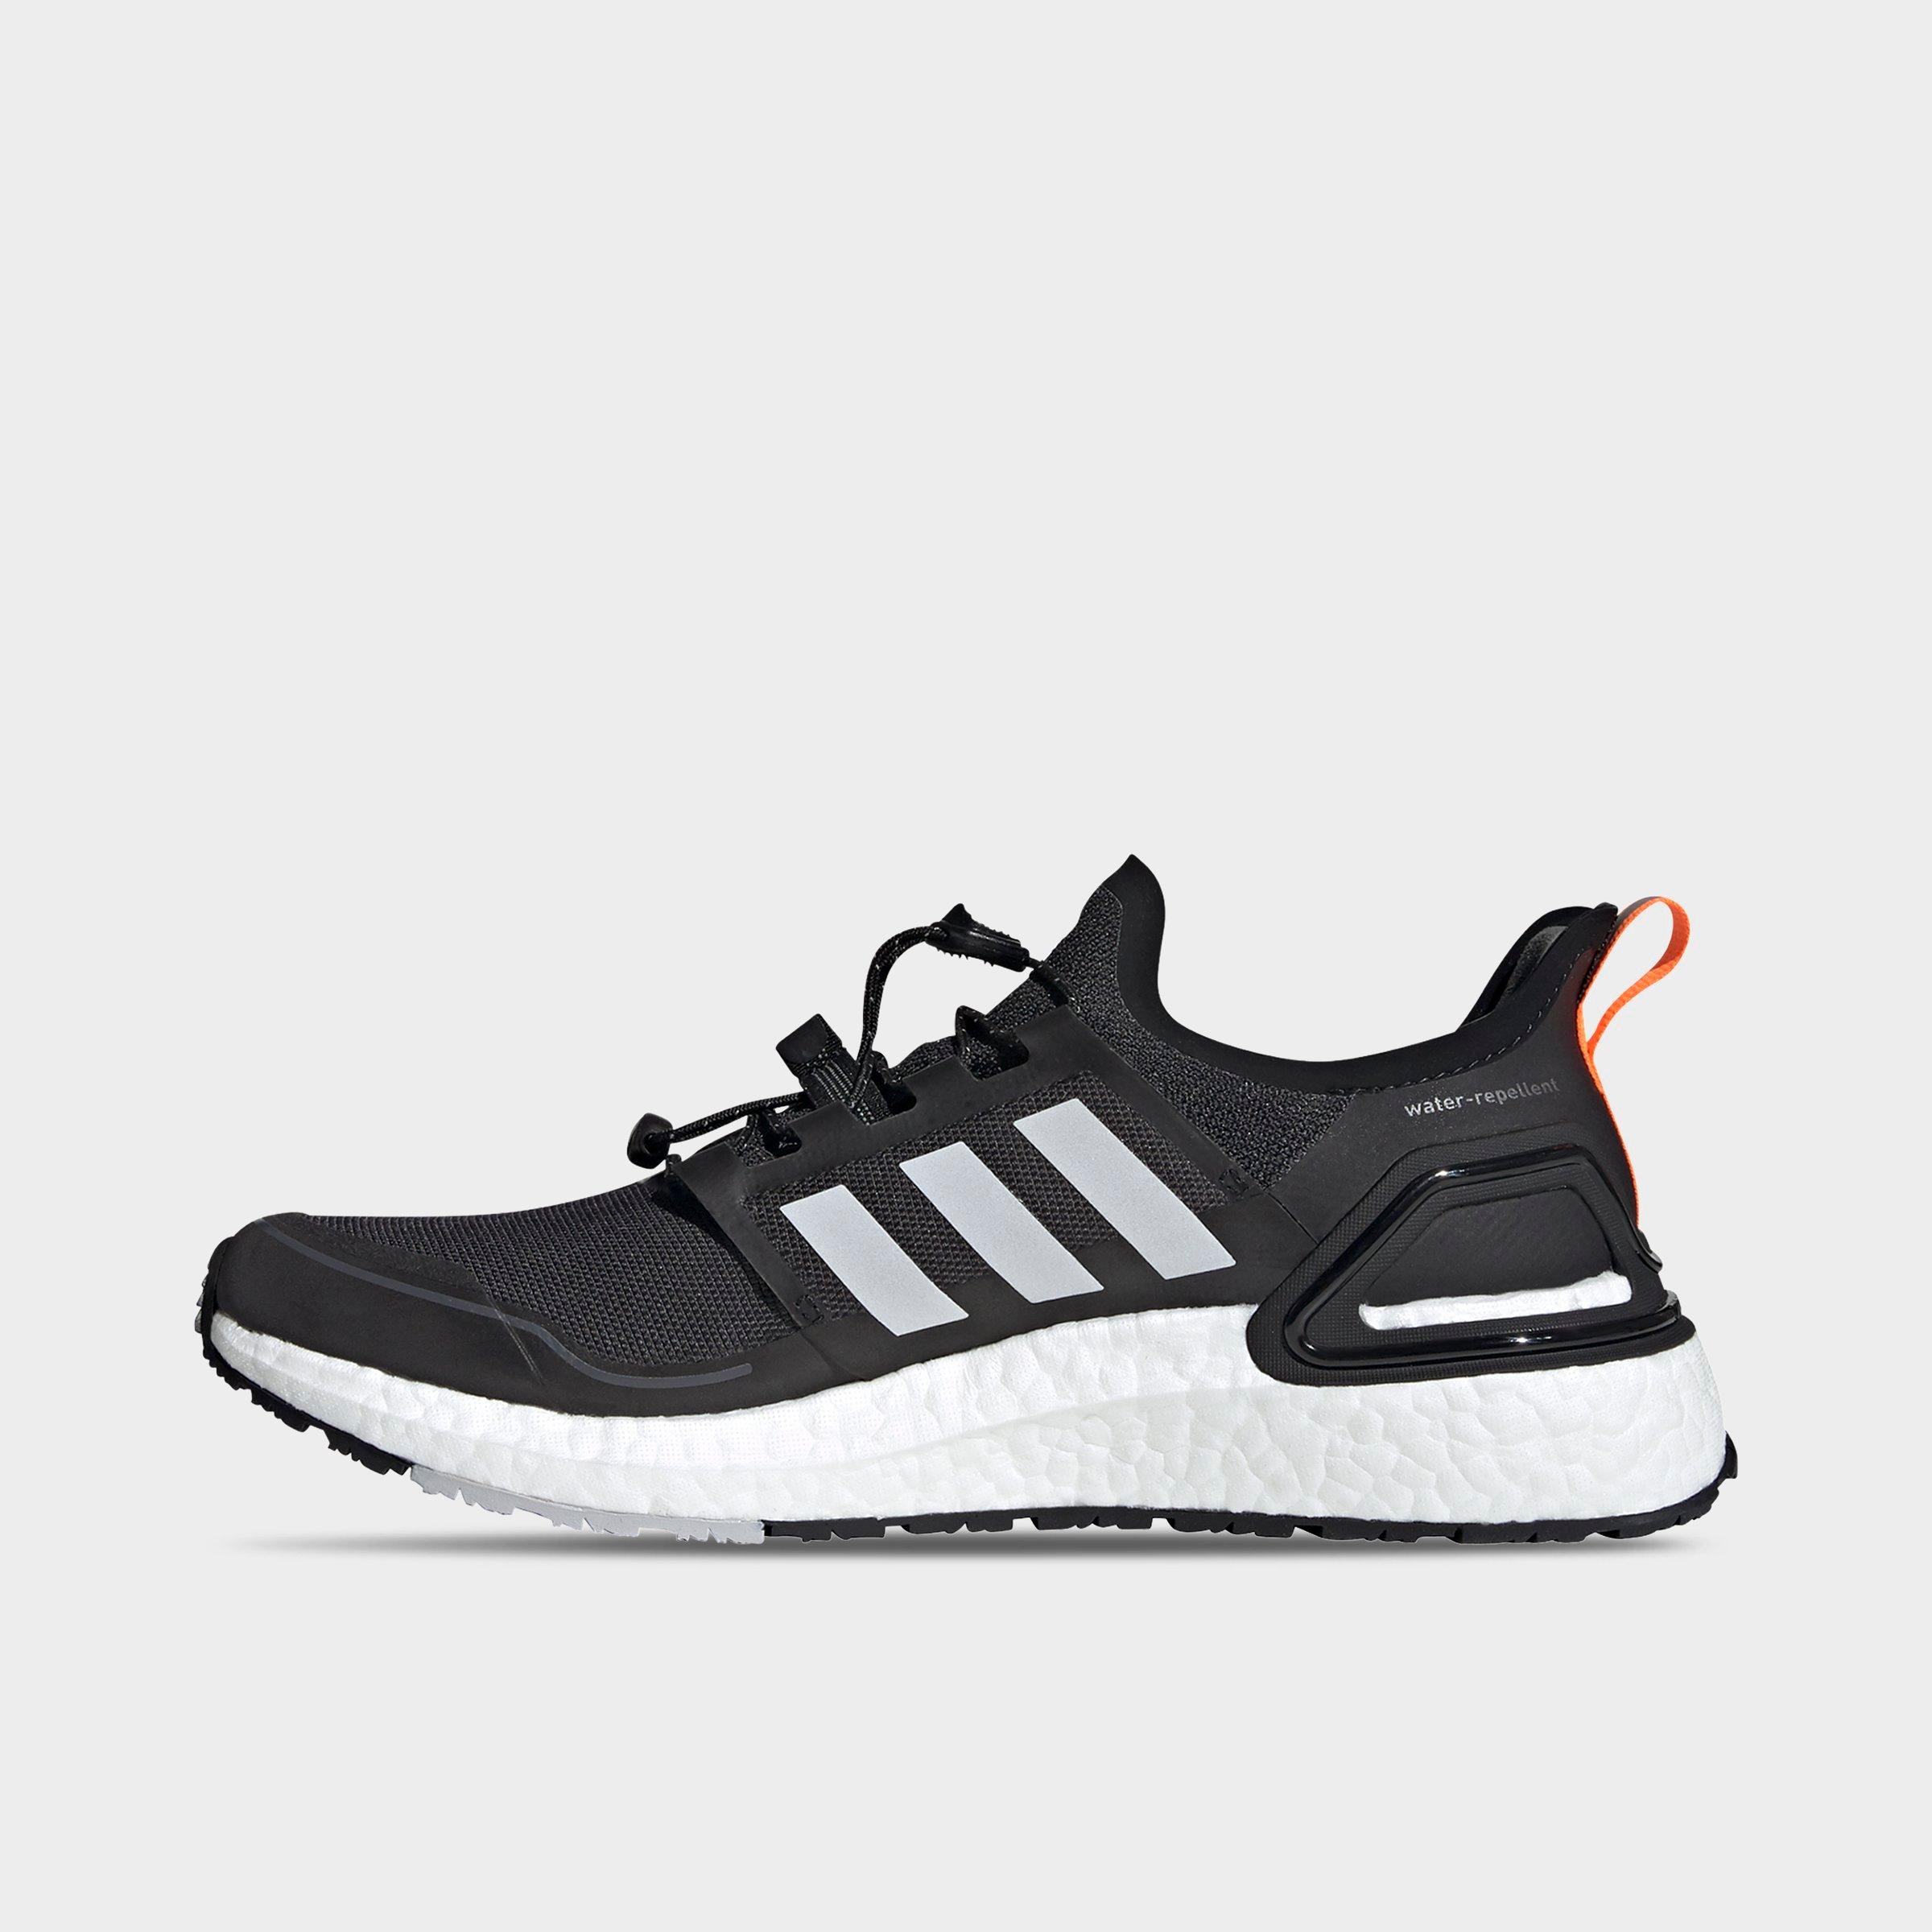 adidas boost shoes